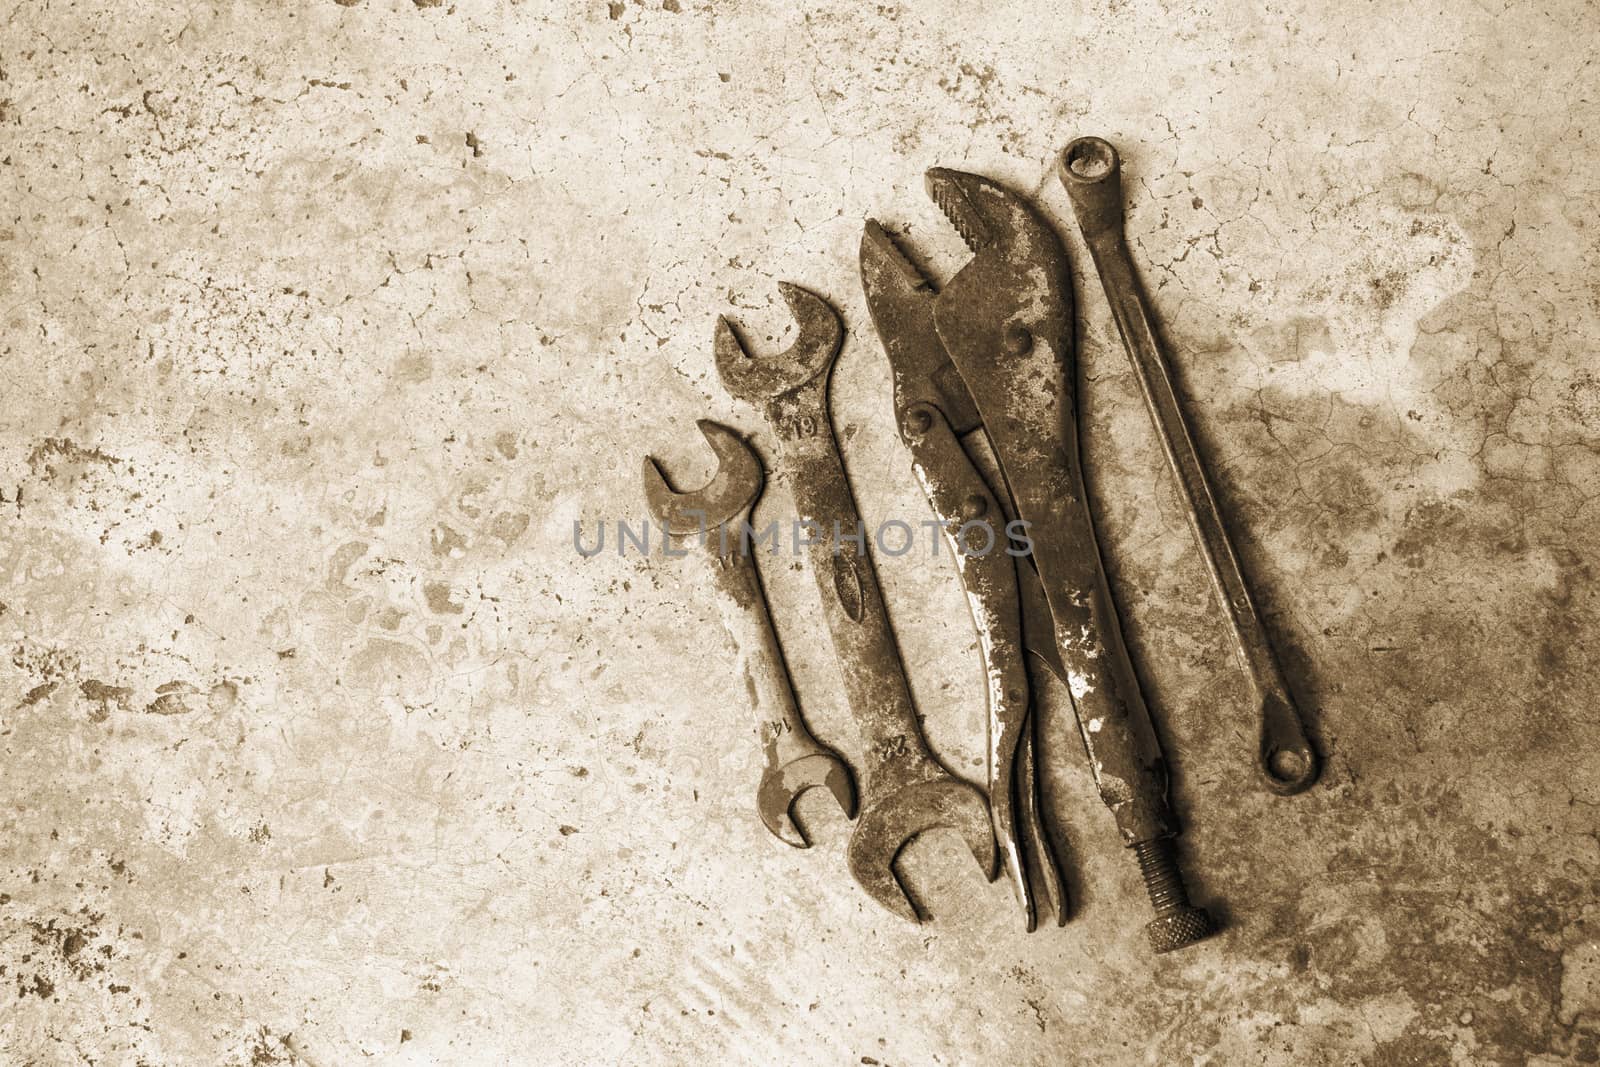 The old rusty tools supplies put on the ground sepia style